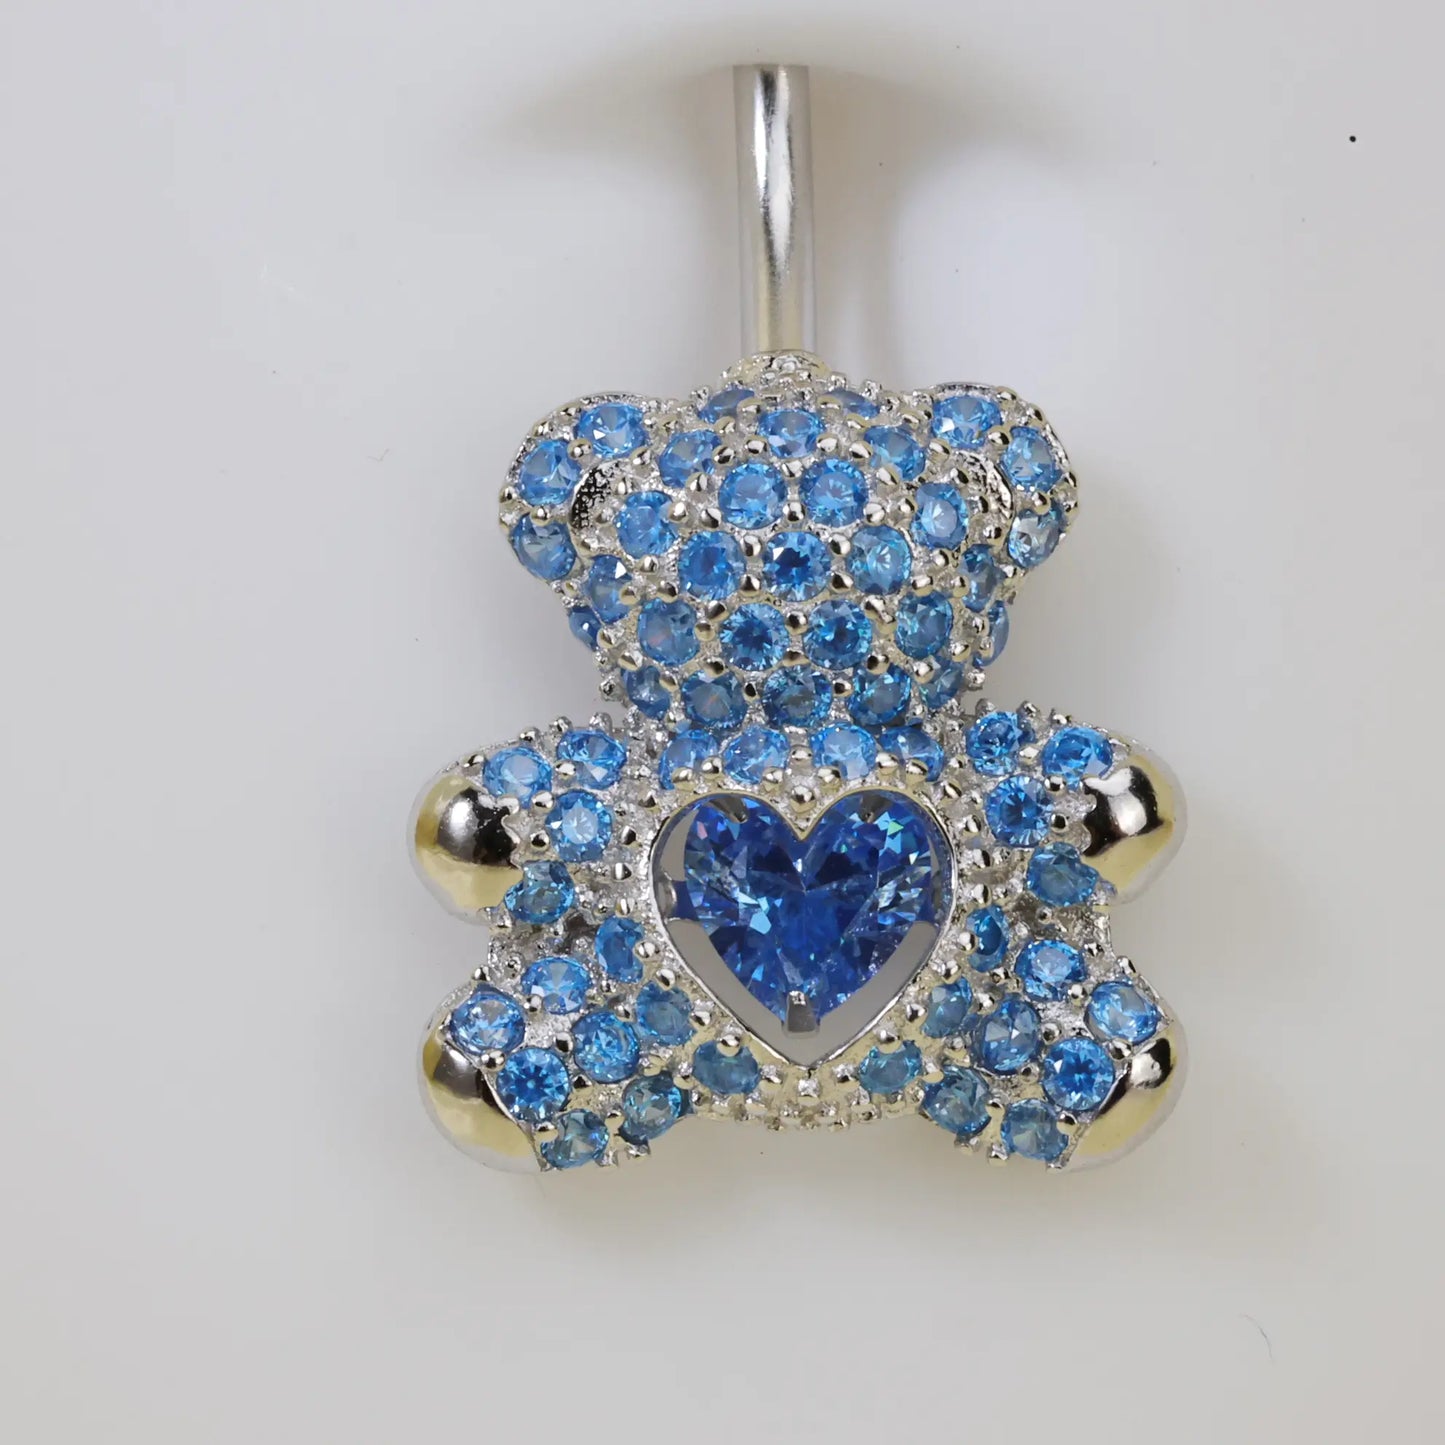 Blue Teddy Bear Belly Button Ring (With Dangling Heart)